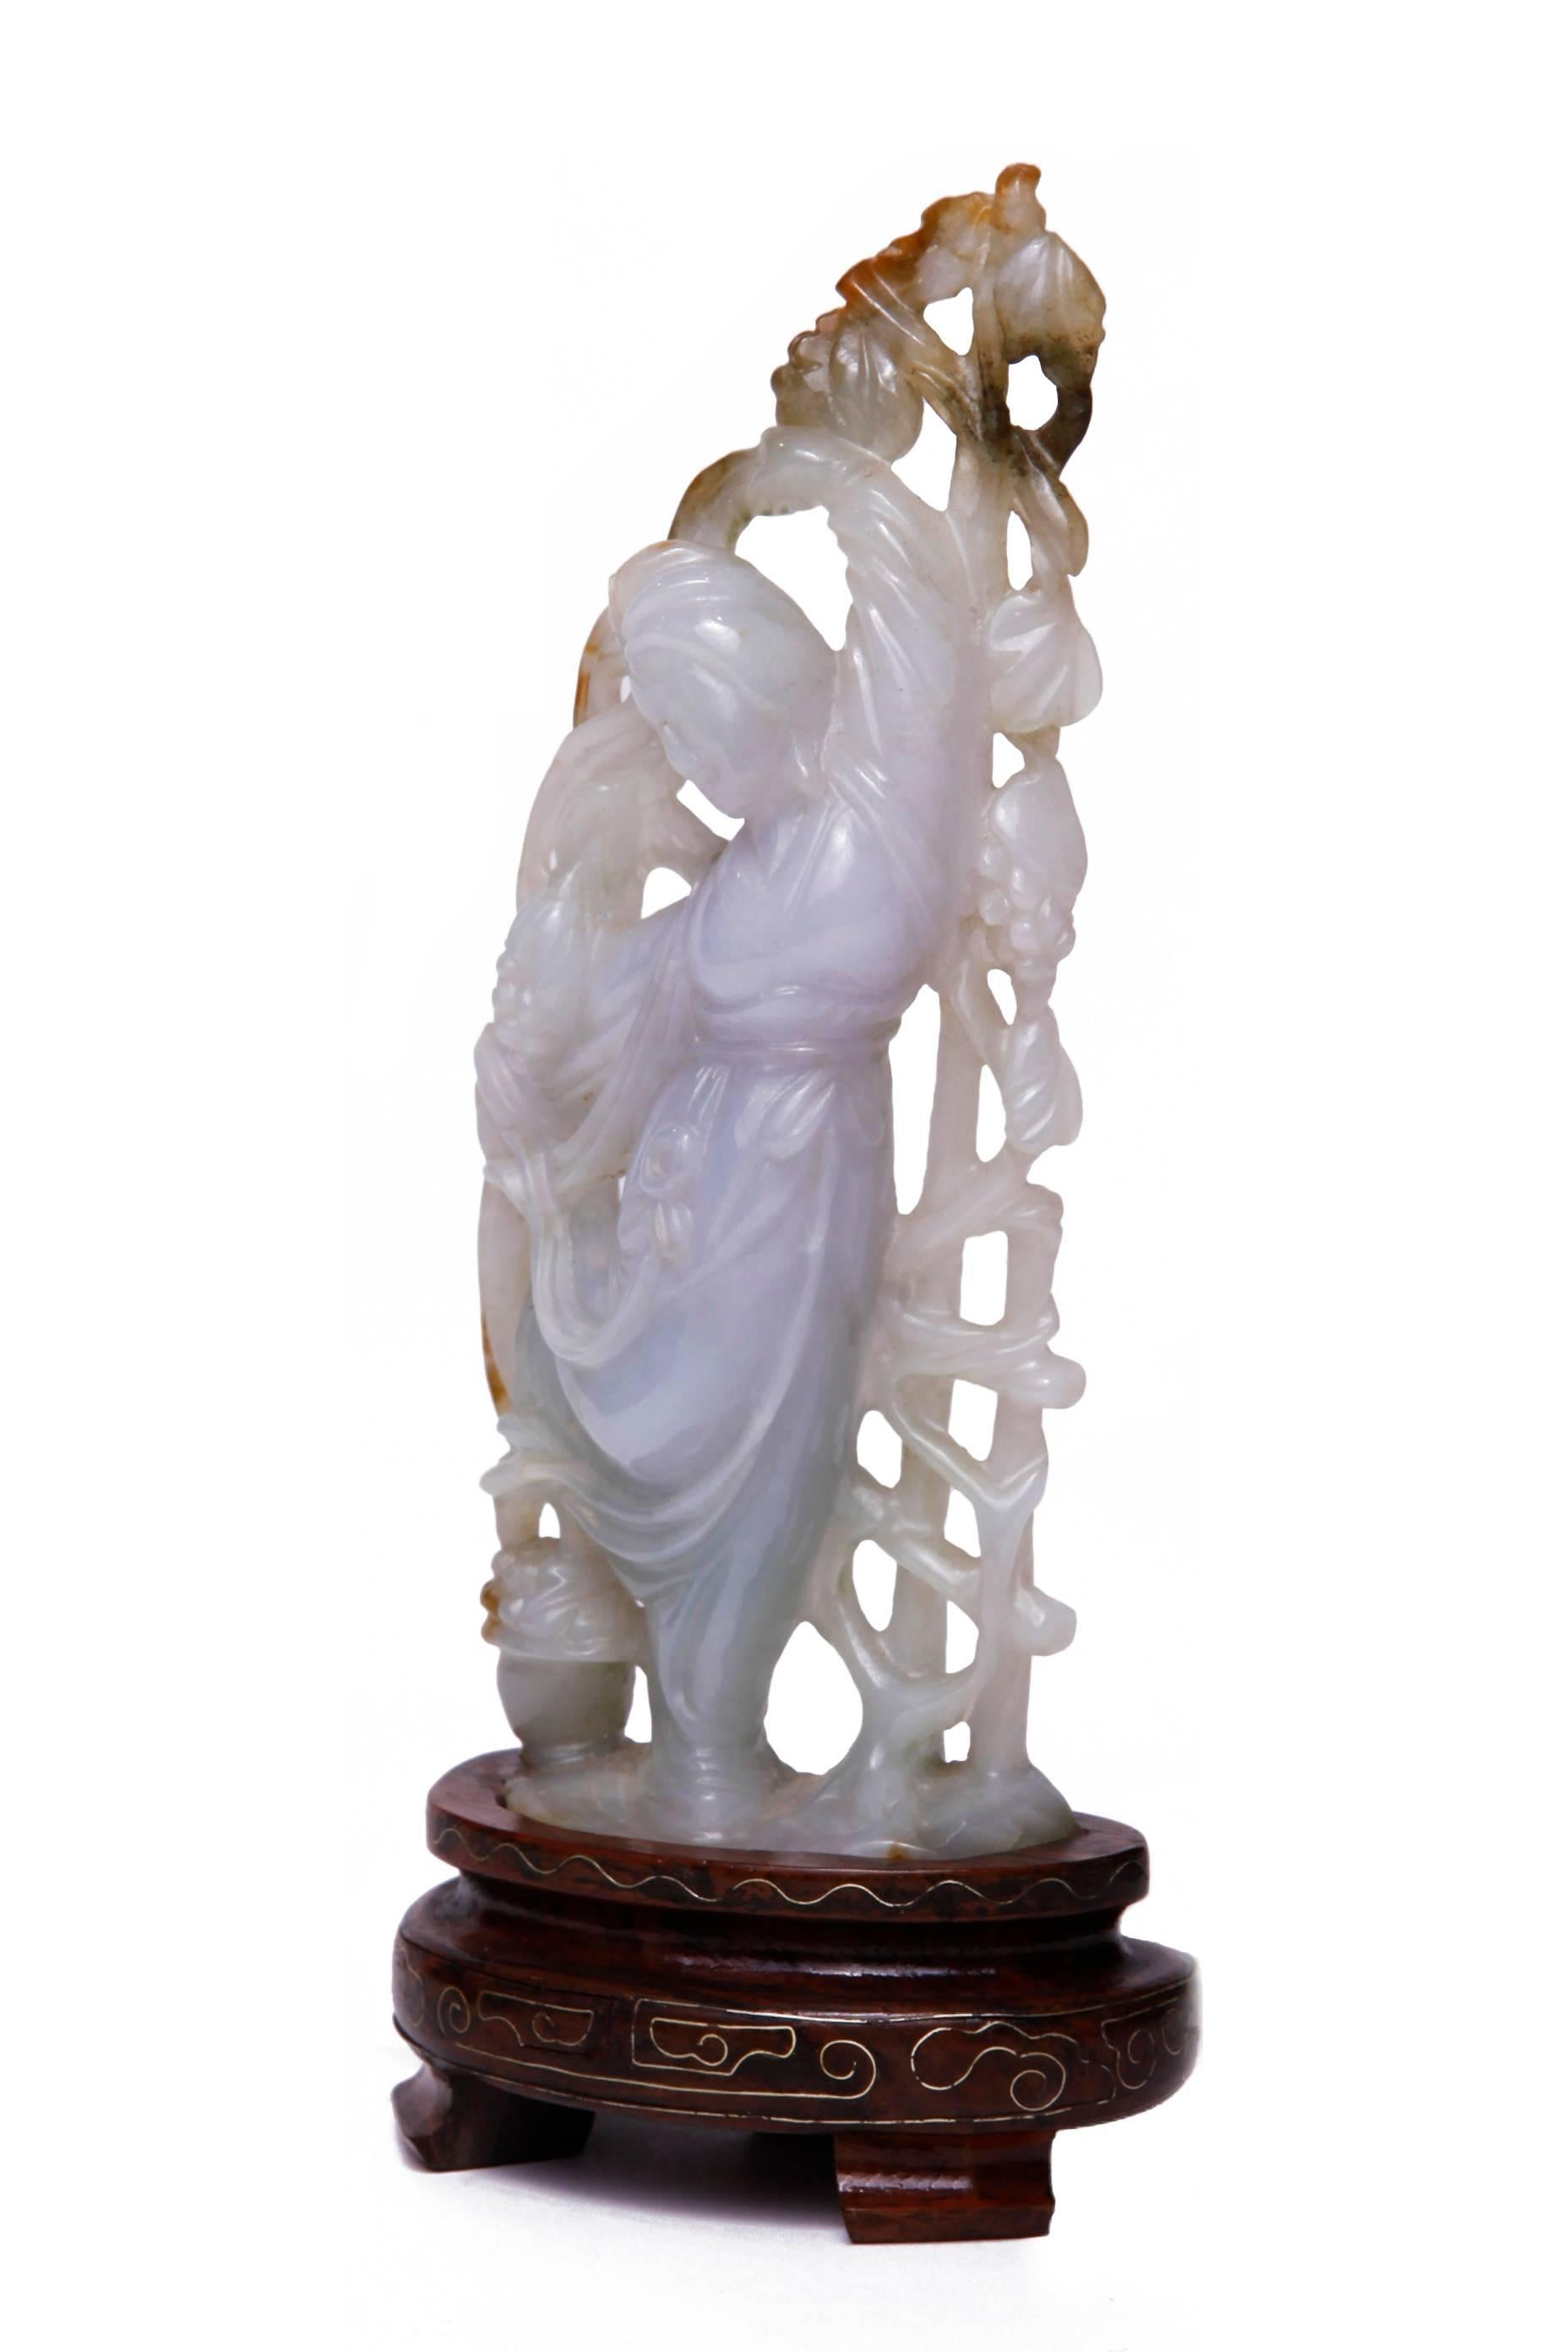 Sculpture of Guanyin
White lavender jade mounted on wood base
Early 20th century.
 